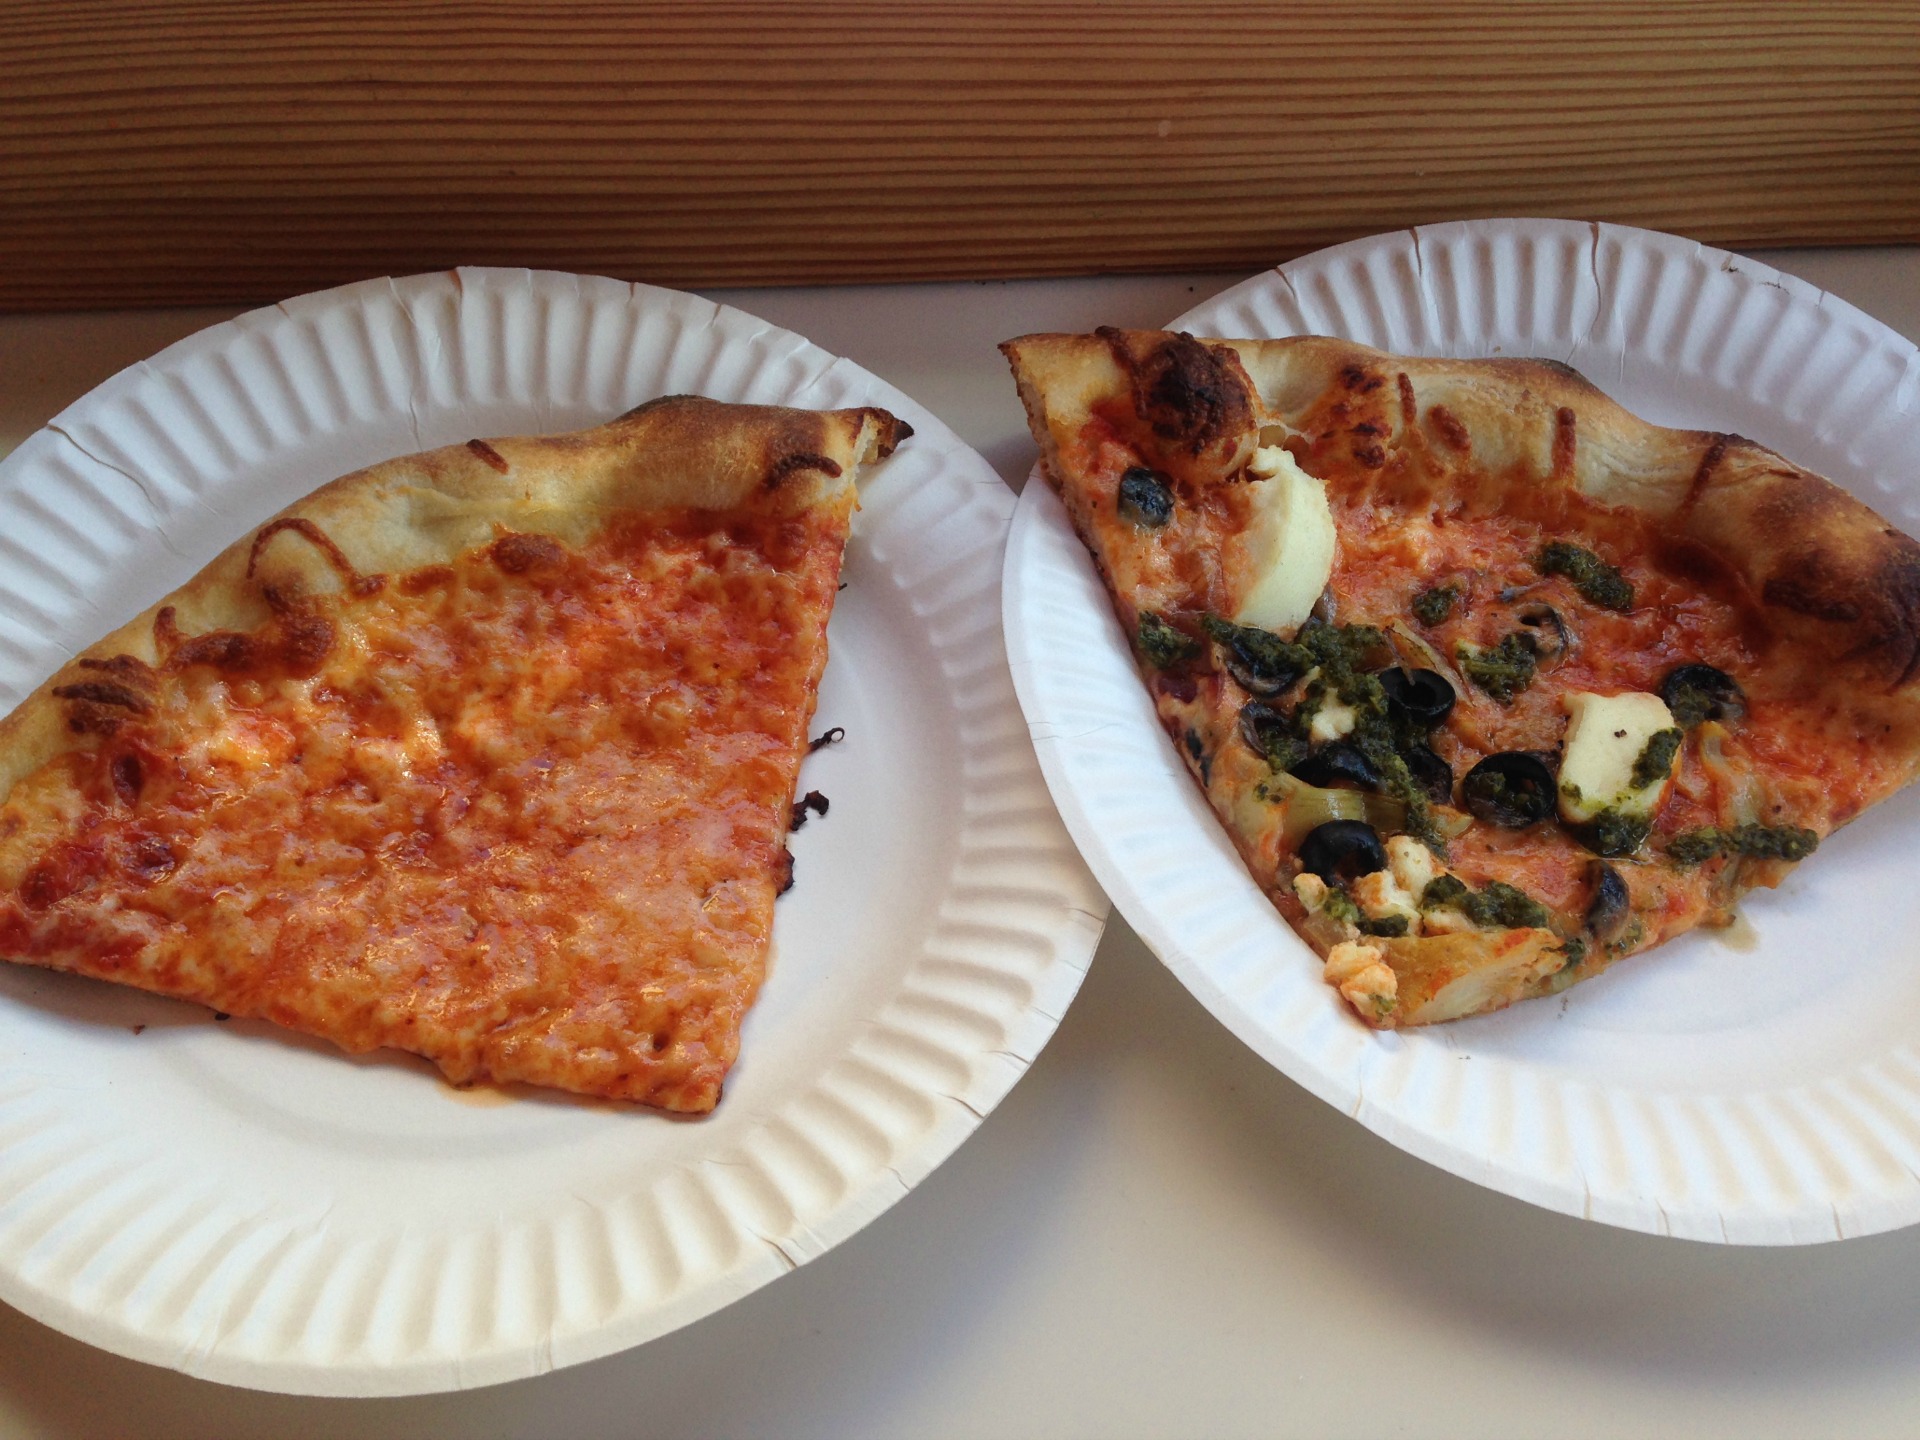 A slice of cheese and a slice of artichoke pesto from Berkeley's Pizzahhh.